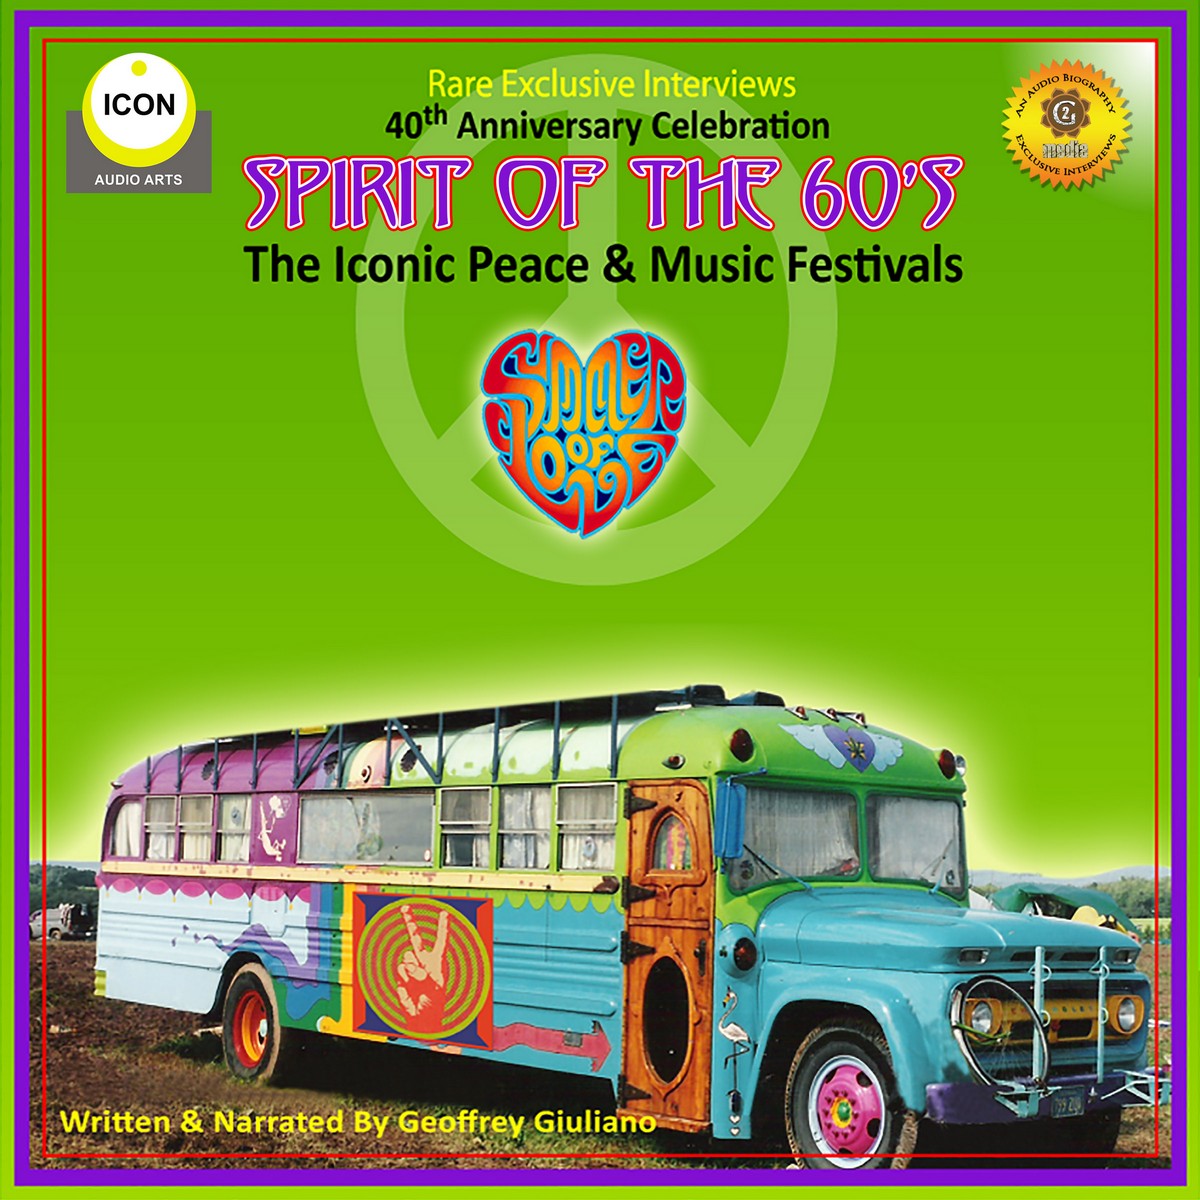 Spirit of the 60s – The Iconic Peace & Music Festivals